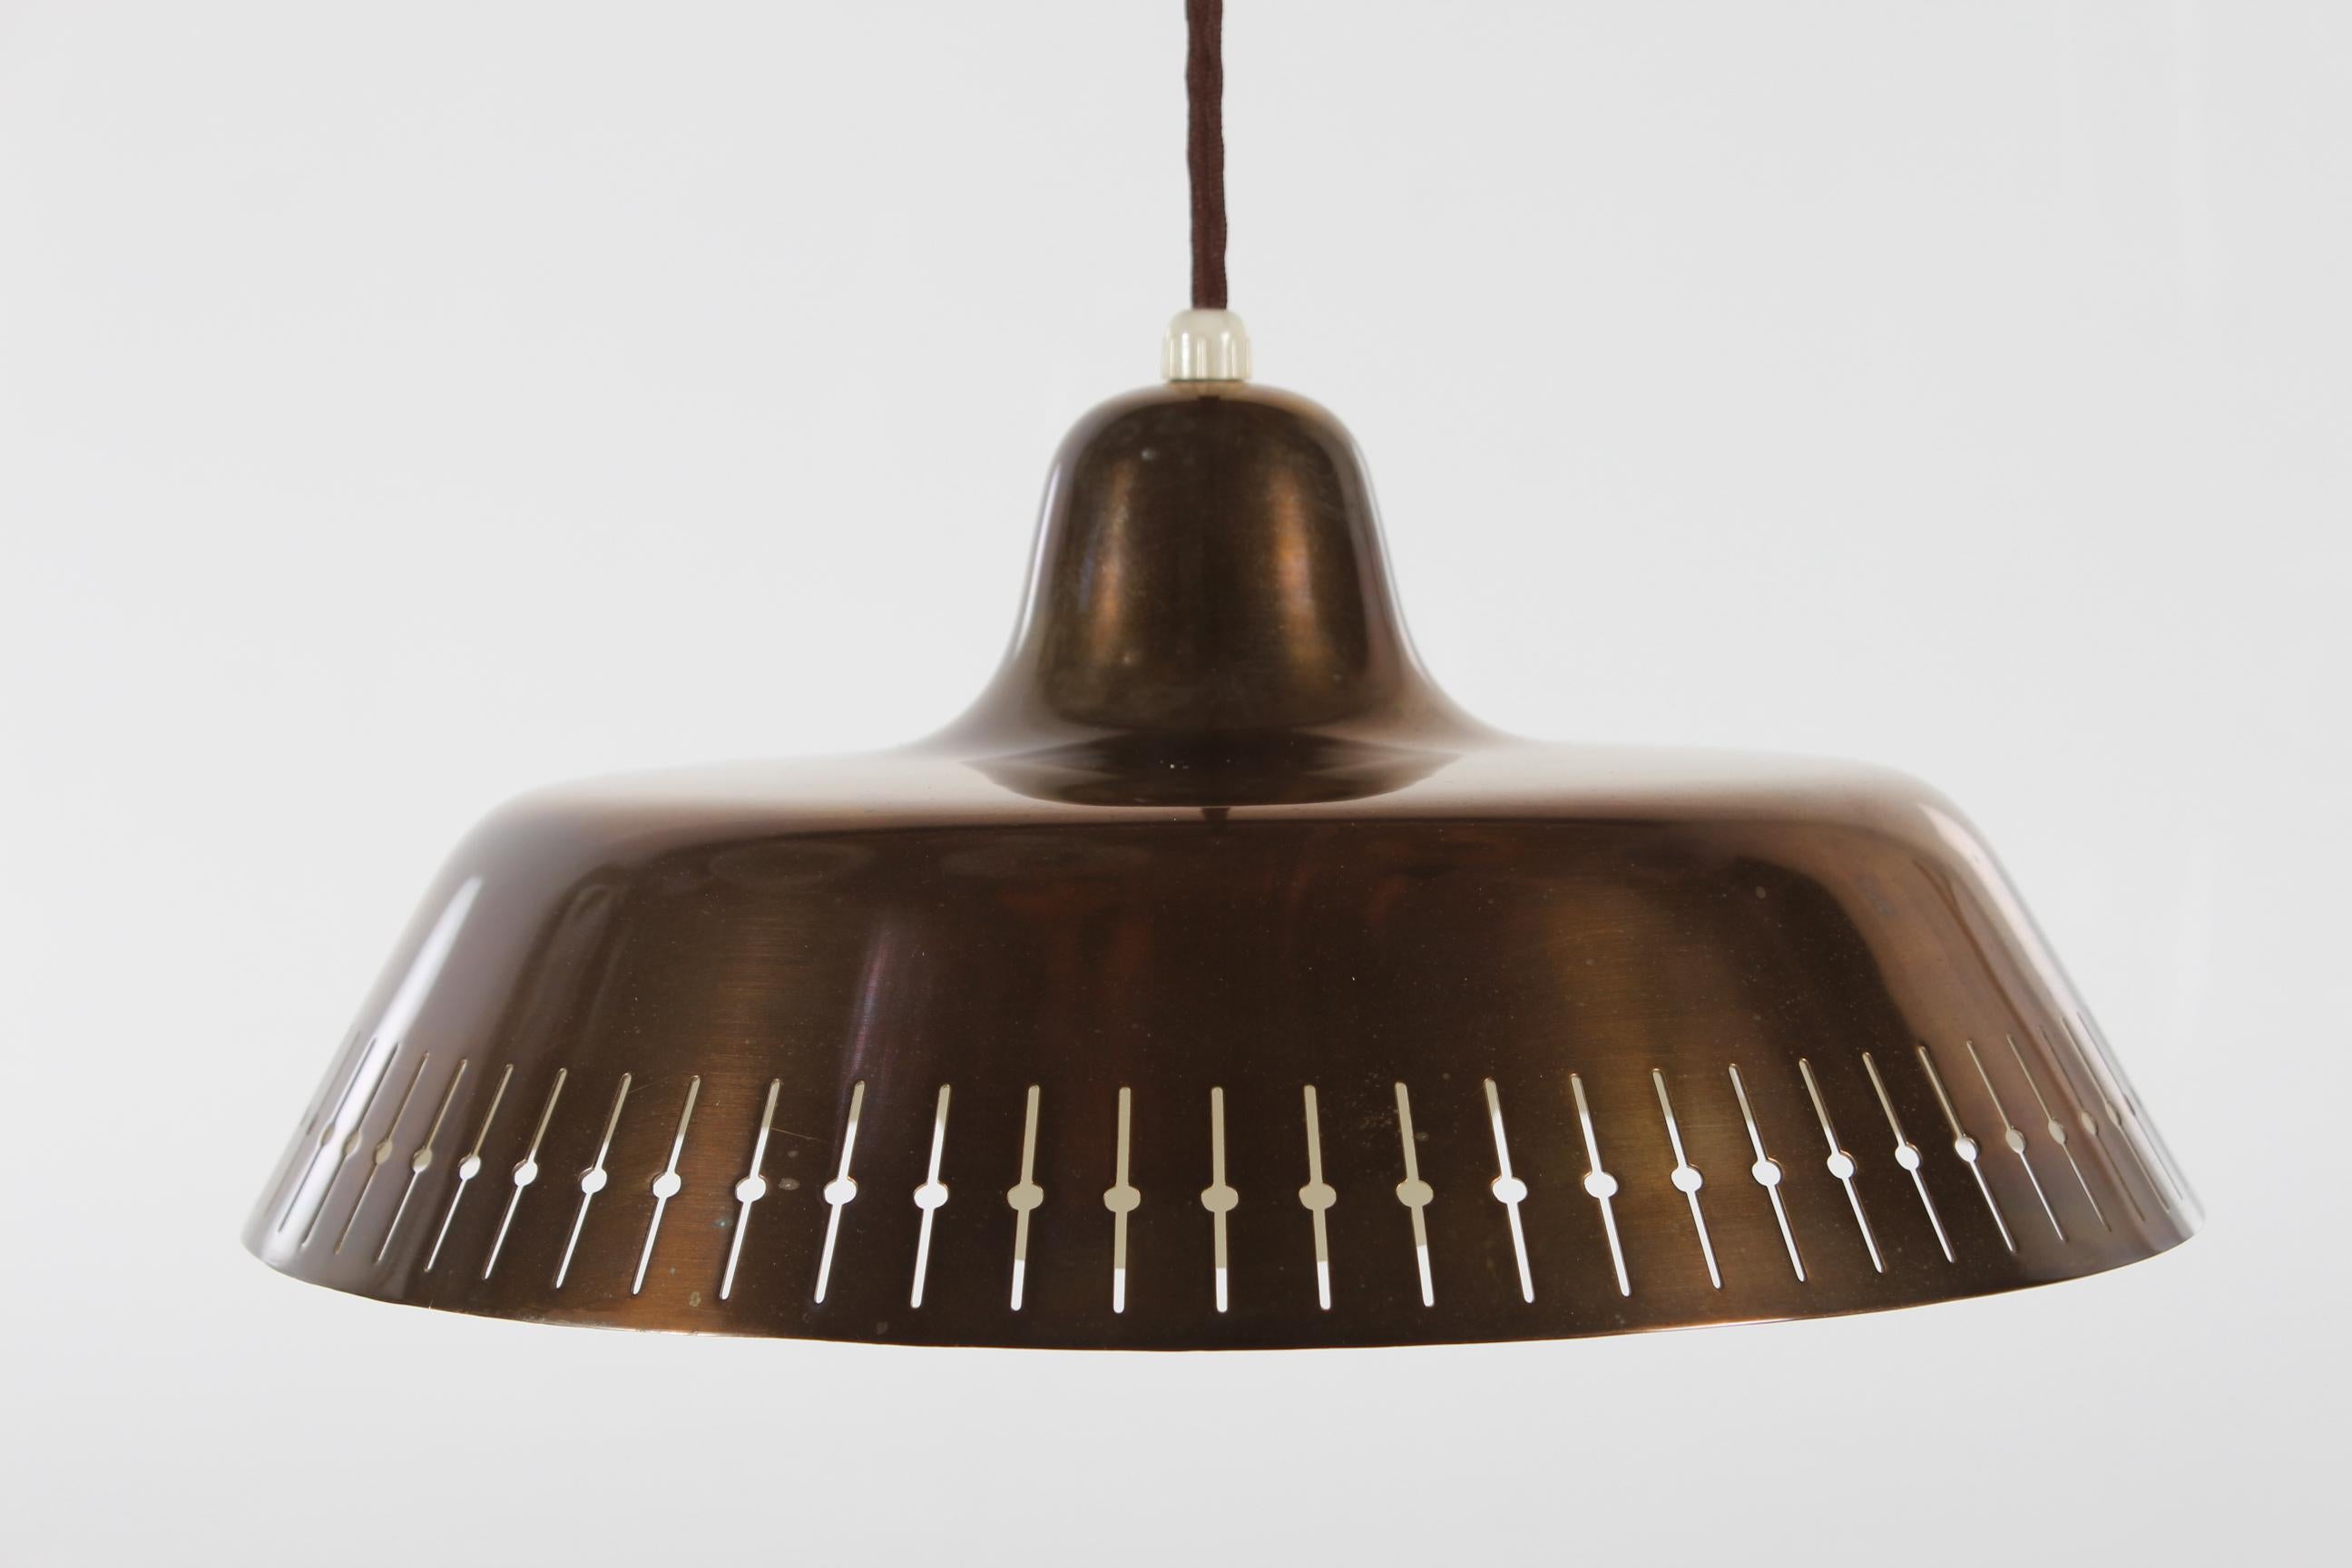 This pendant is made of brass with a fine patina on the surface, a patina developed from gentle use over time. The inside of the pendant has white lacquer.
The perforated pattern along the rim give a nice and pleasant light effect.
The light bulb